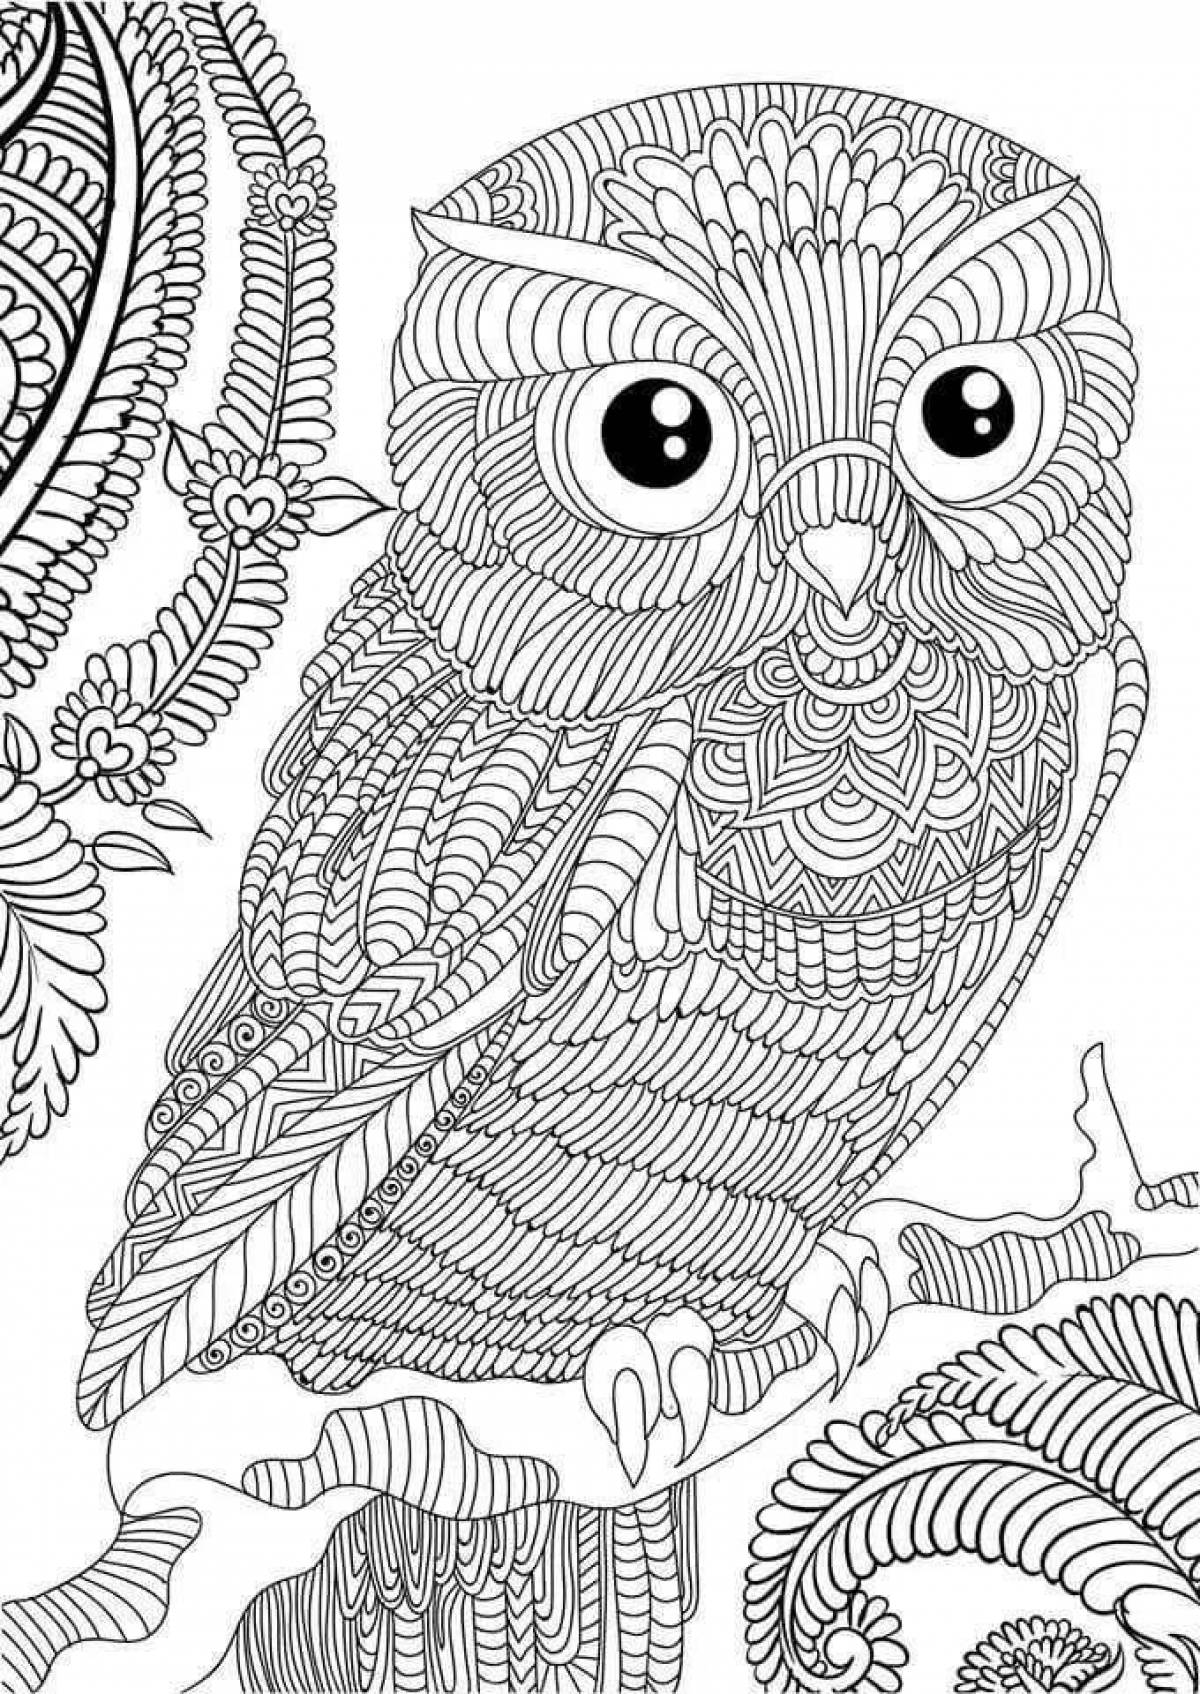 Complete coloring book for girls